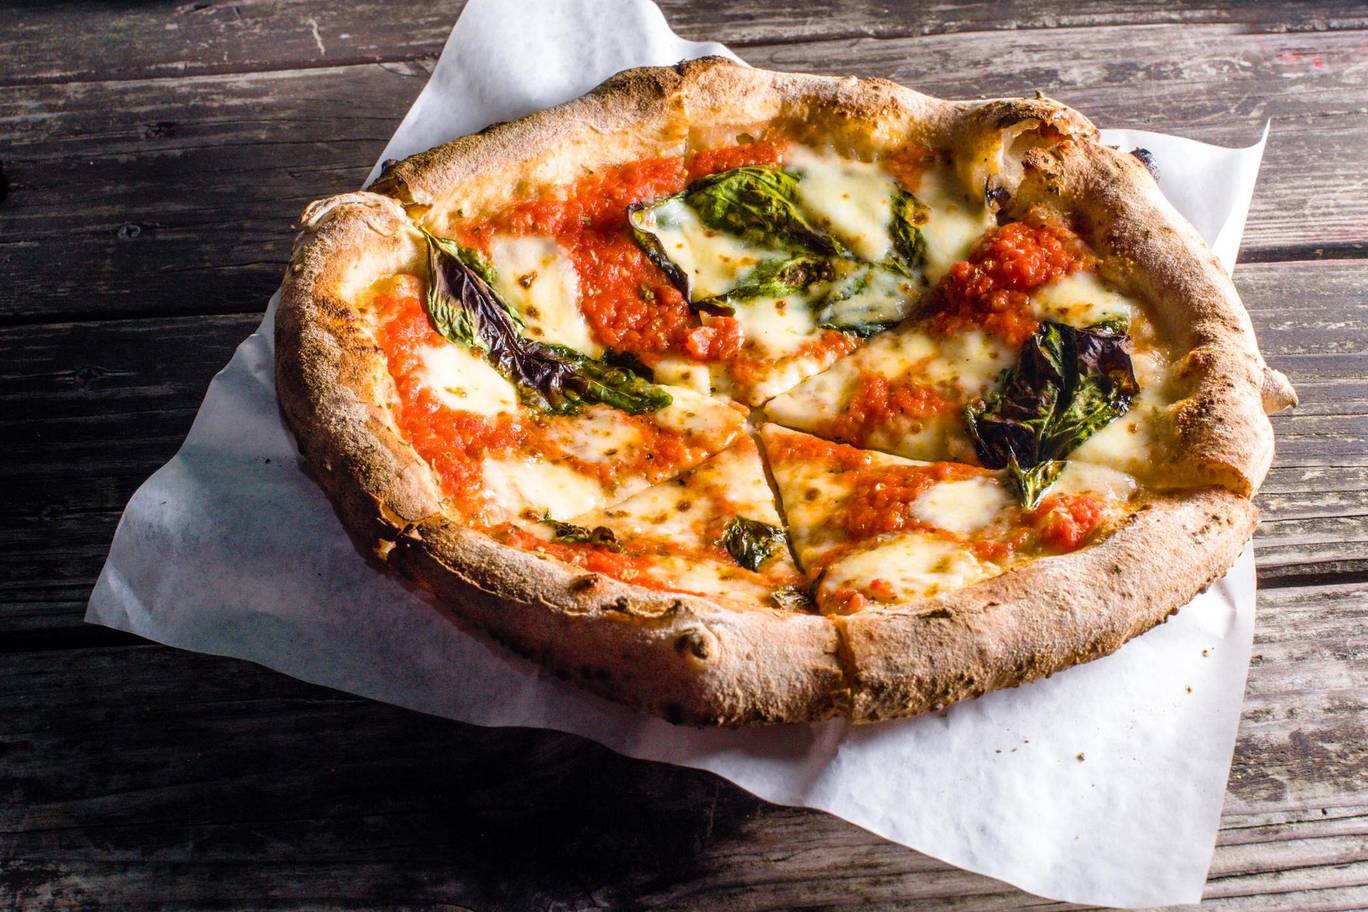 NEW STUDY: How Many Pizzas the Average Brit Eats in Their Lifetime